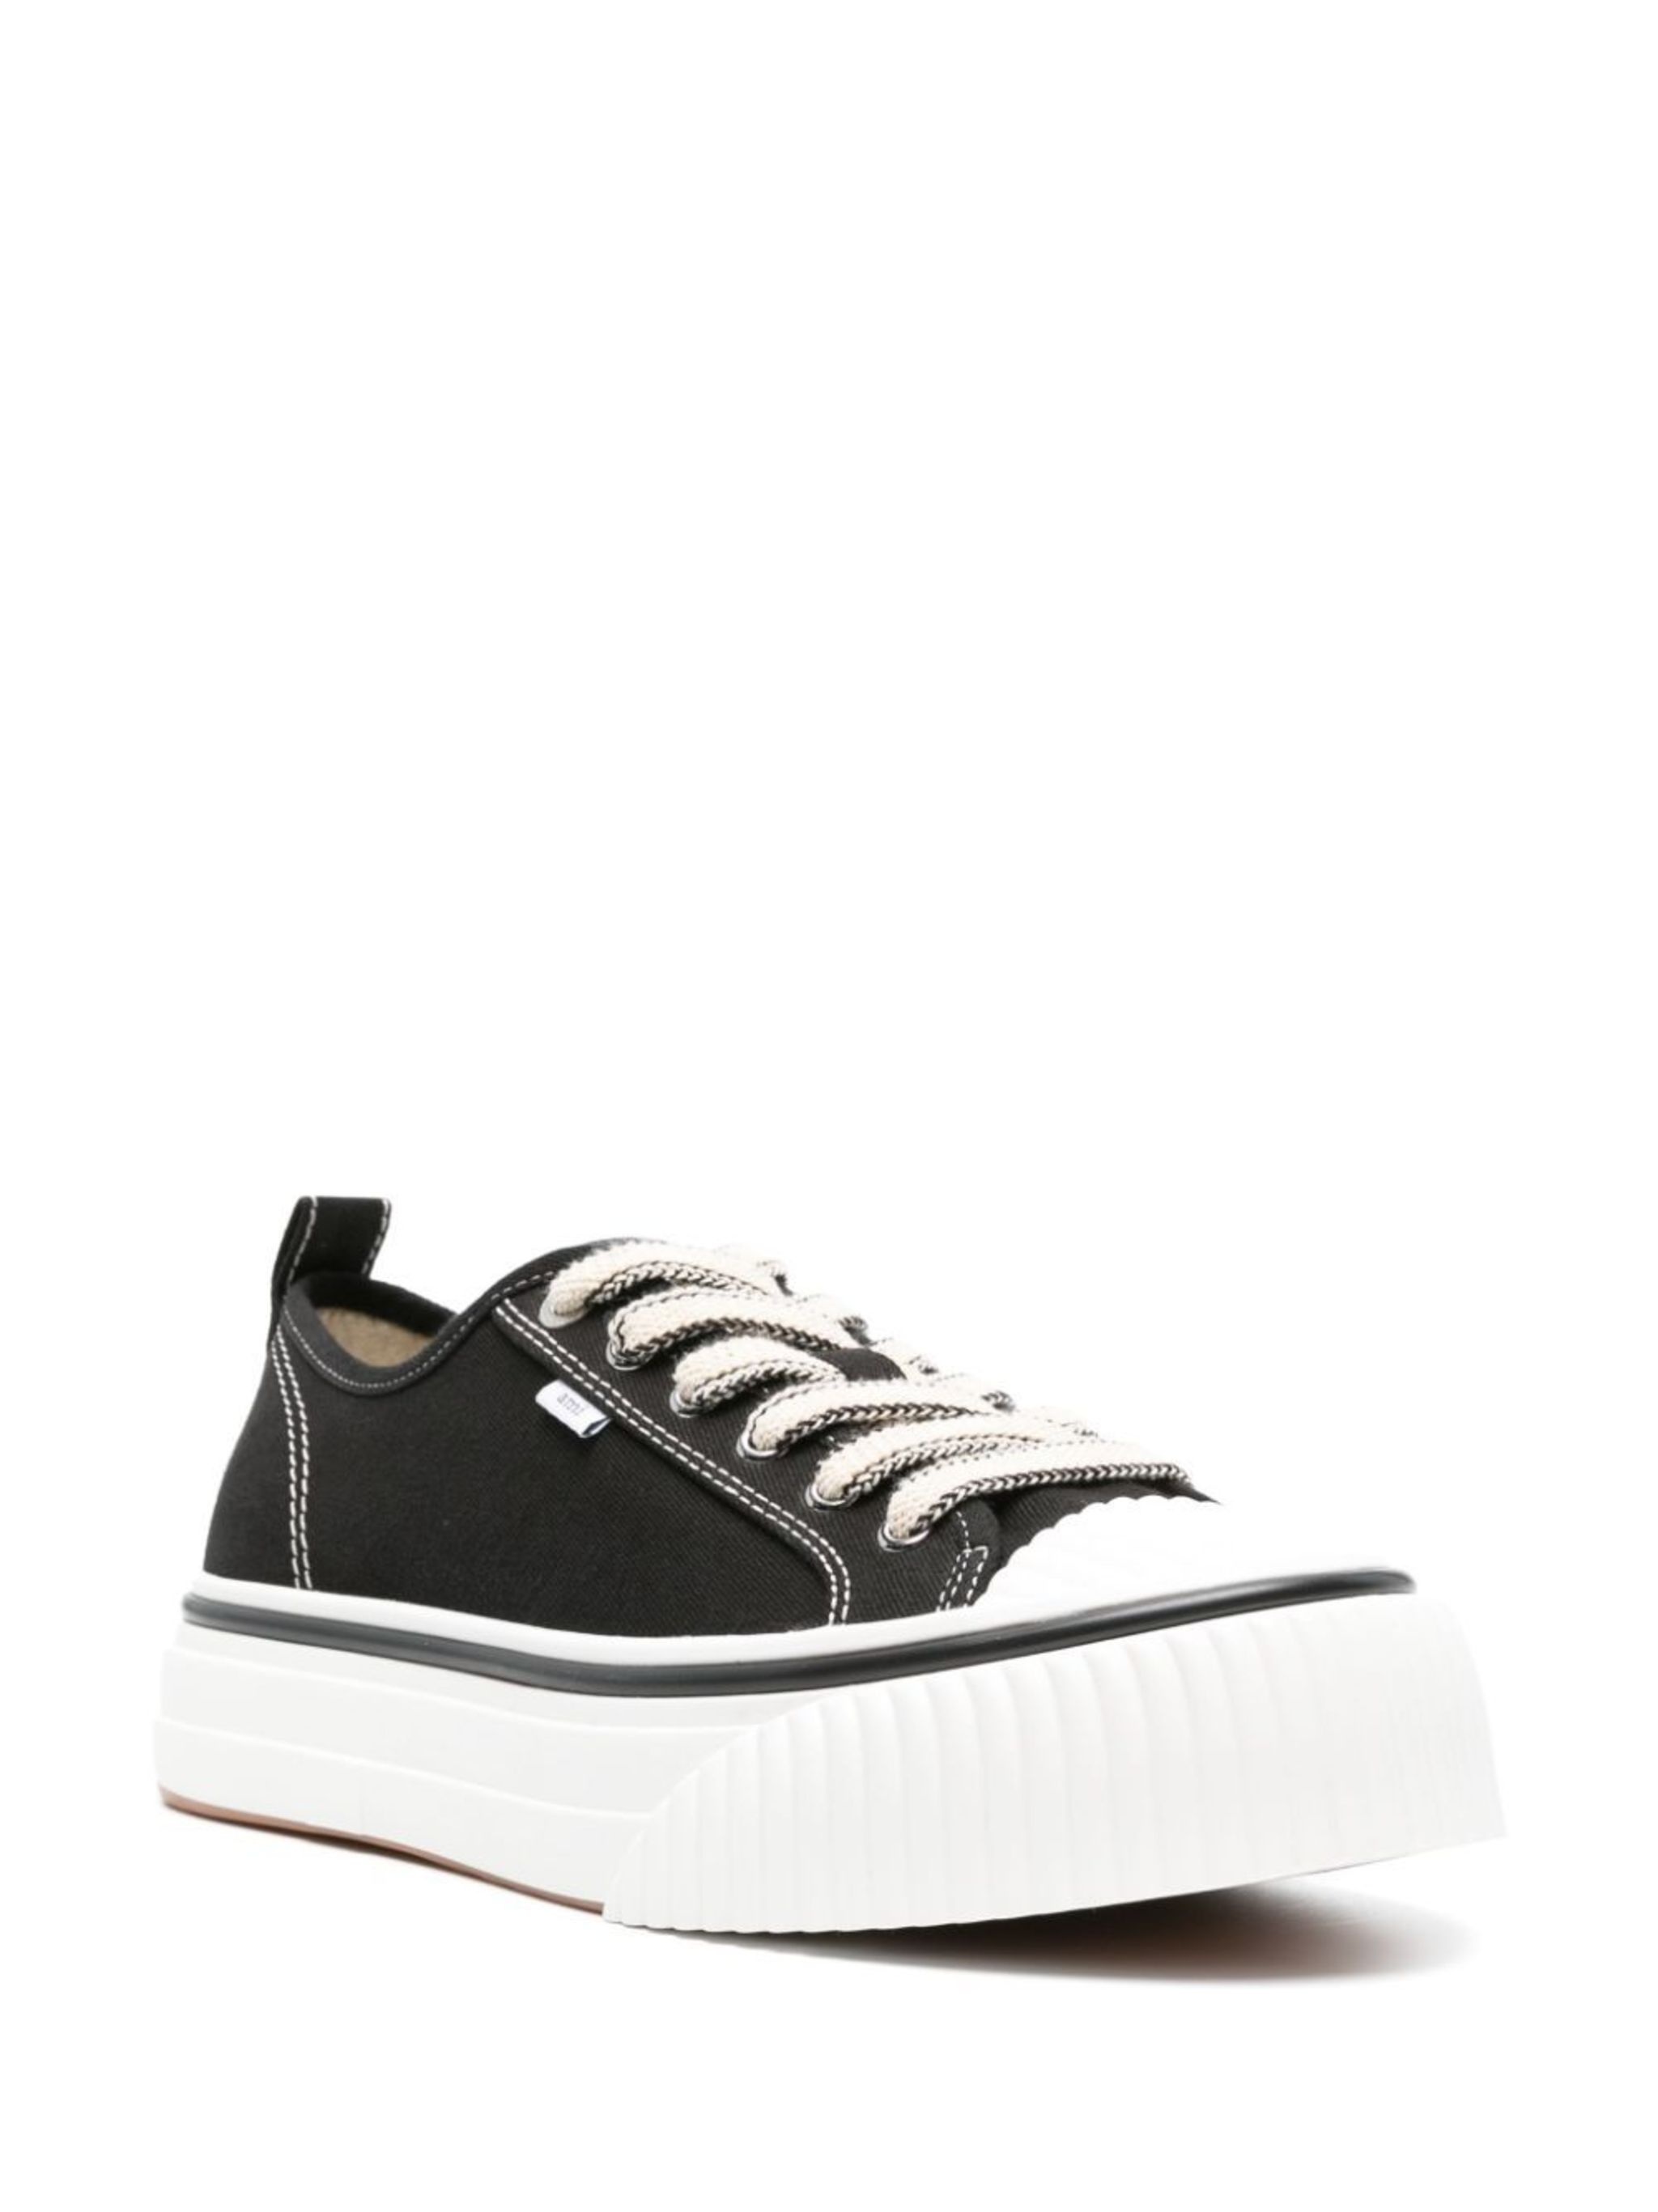 Sn1980 canvas sneakers - 2